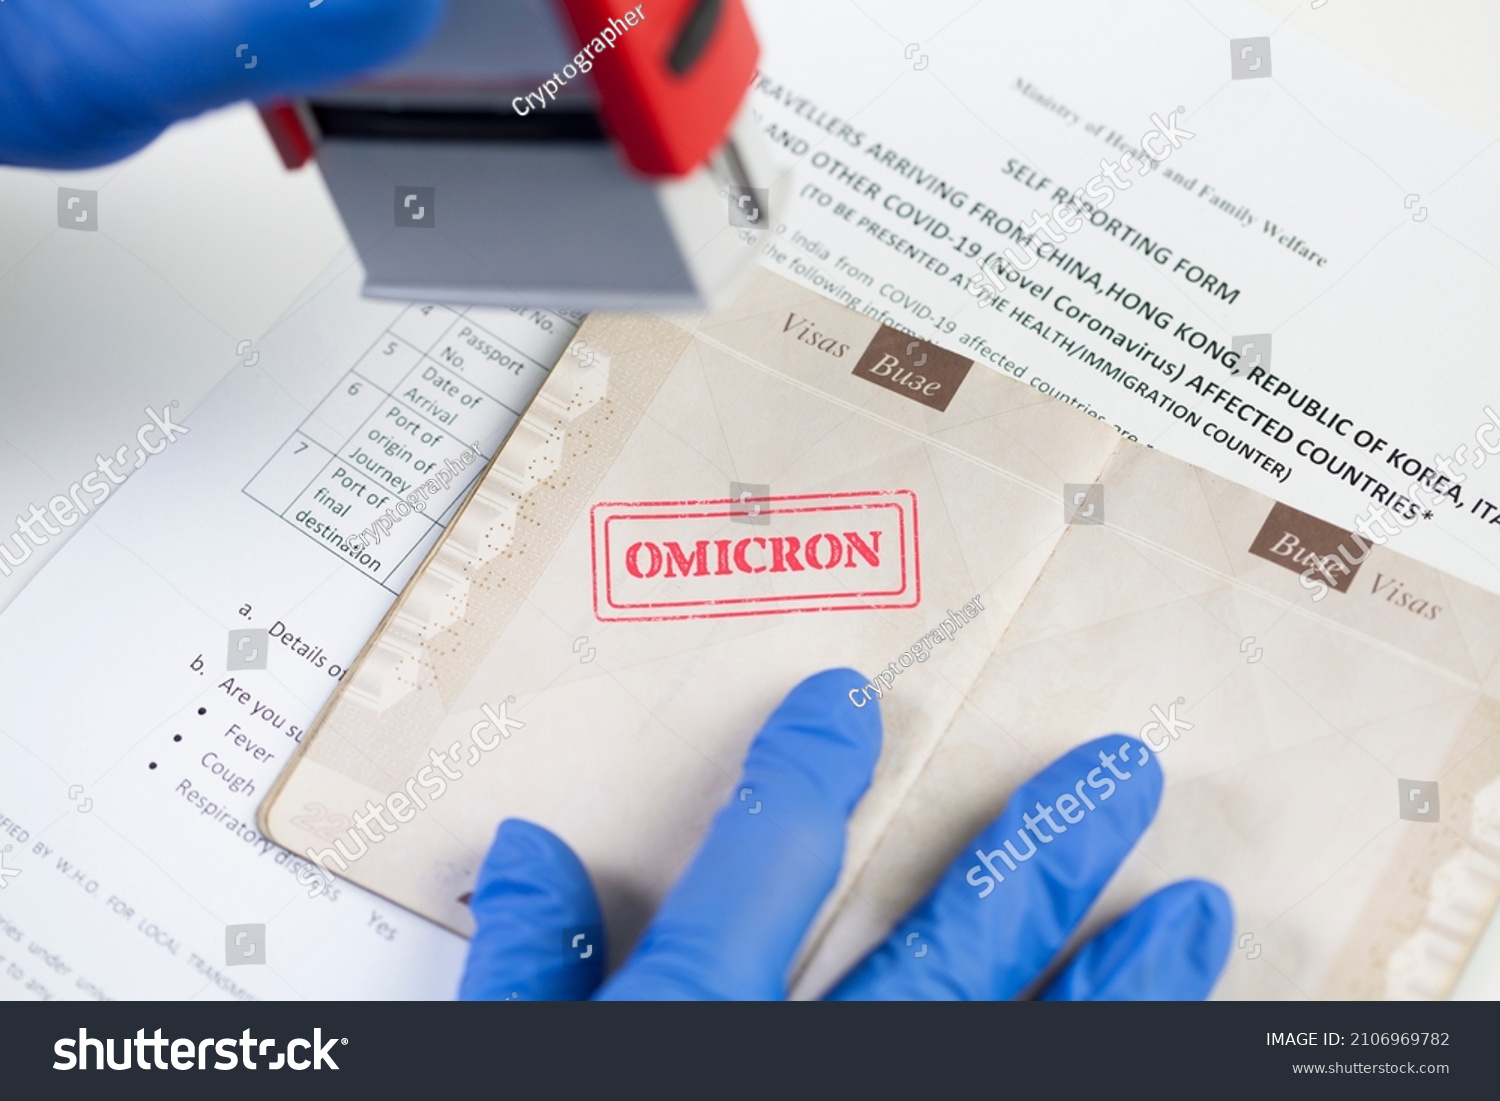 Border security officer wearing blue protective gloves stamping OMICRON onto document,airport border customs health and safety security check,safety measures due to outbreak of new Coronavirus variant #2106969782